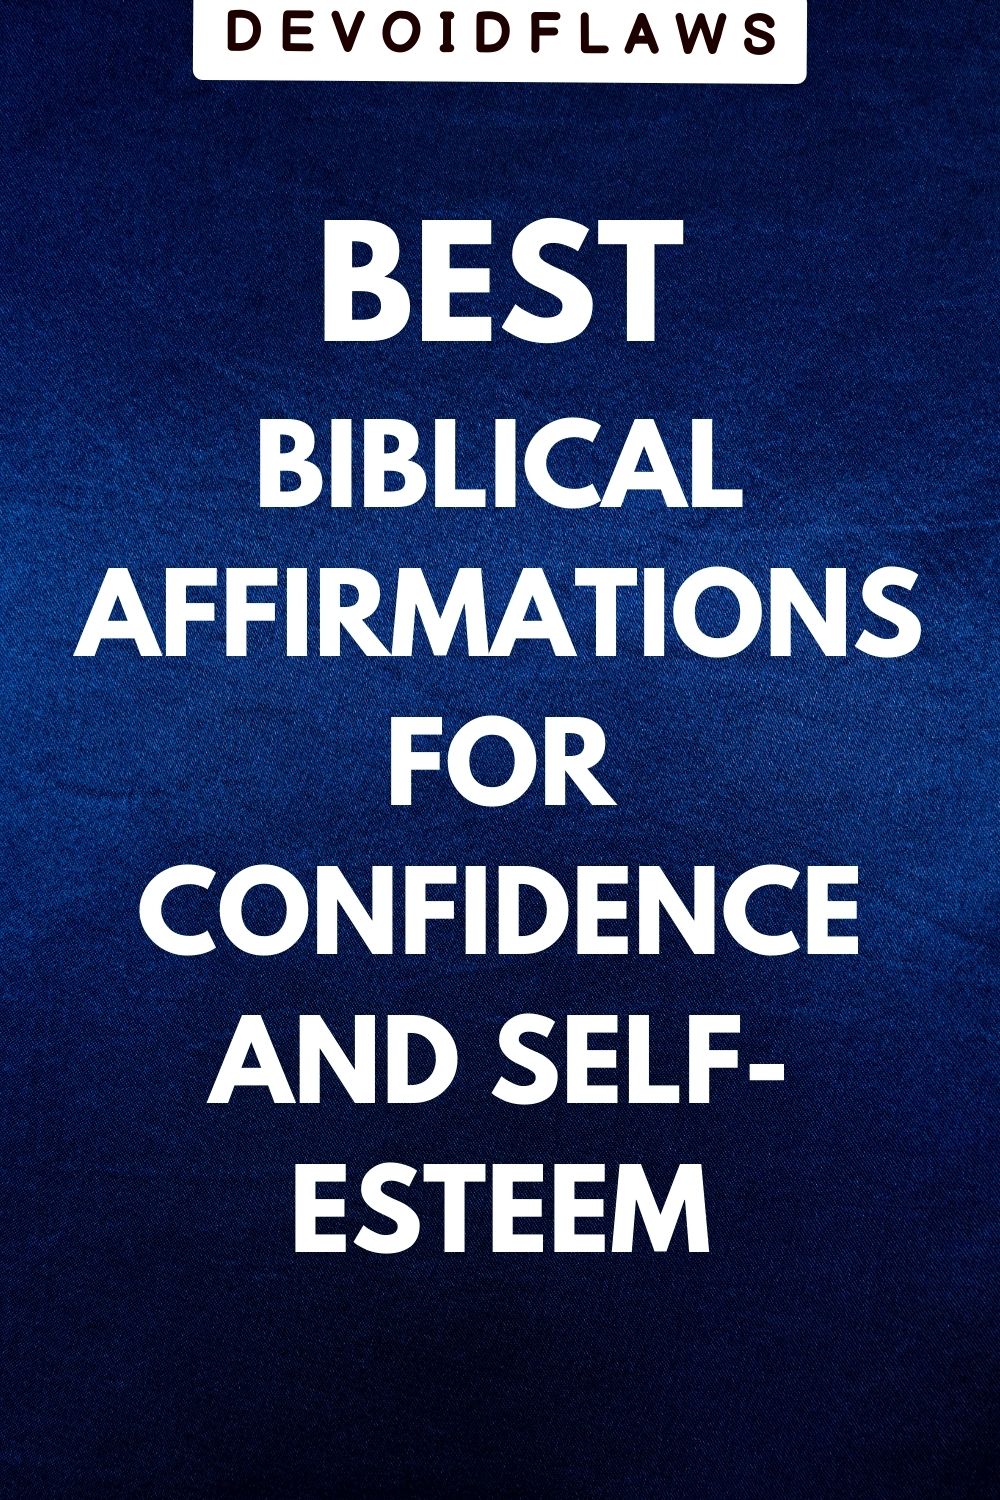 blue background image with text - best biblical affirmations for confidence and self-esteem